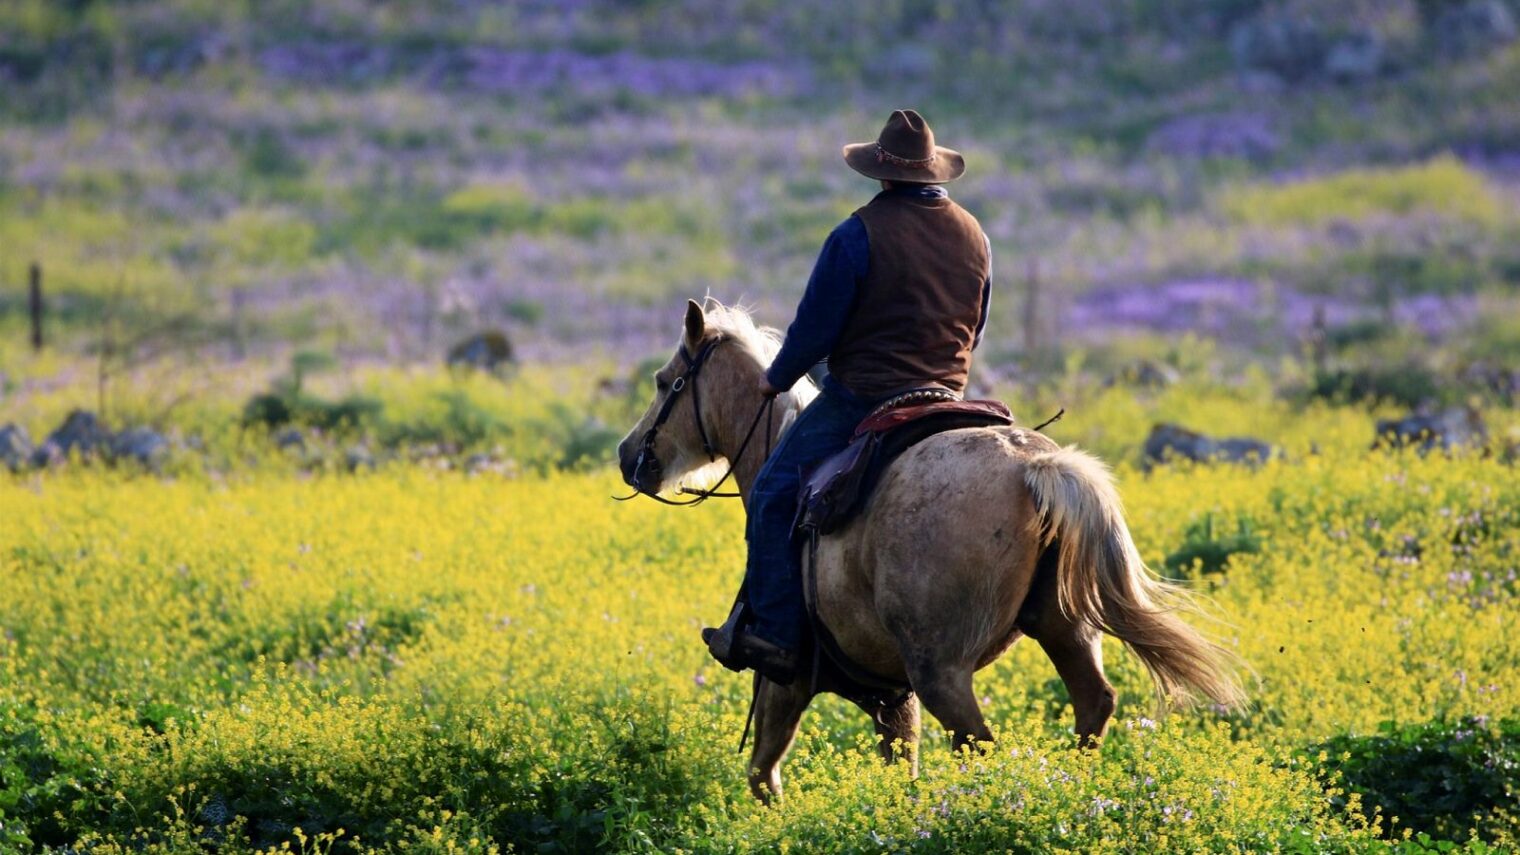 Because Israel has cowboys. Really! A cowboy at work on Kibbutz Marom Golan, in the Golan Heights. Photo by Doron Horowitz/FLASH90